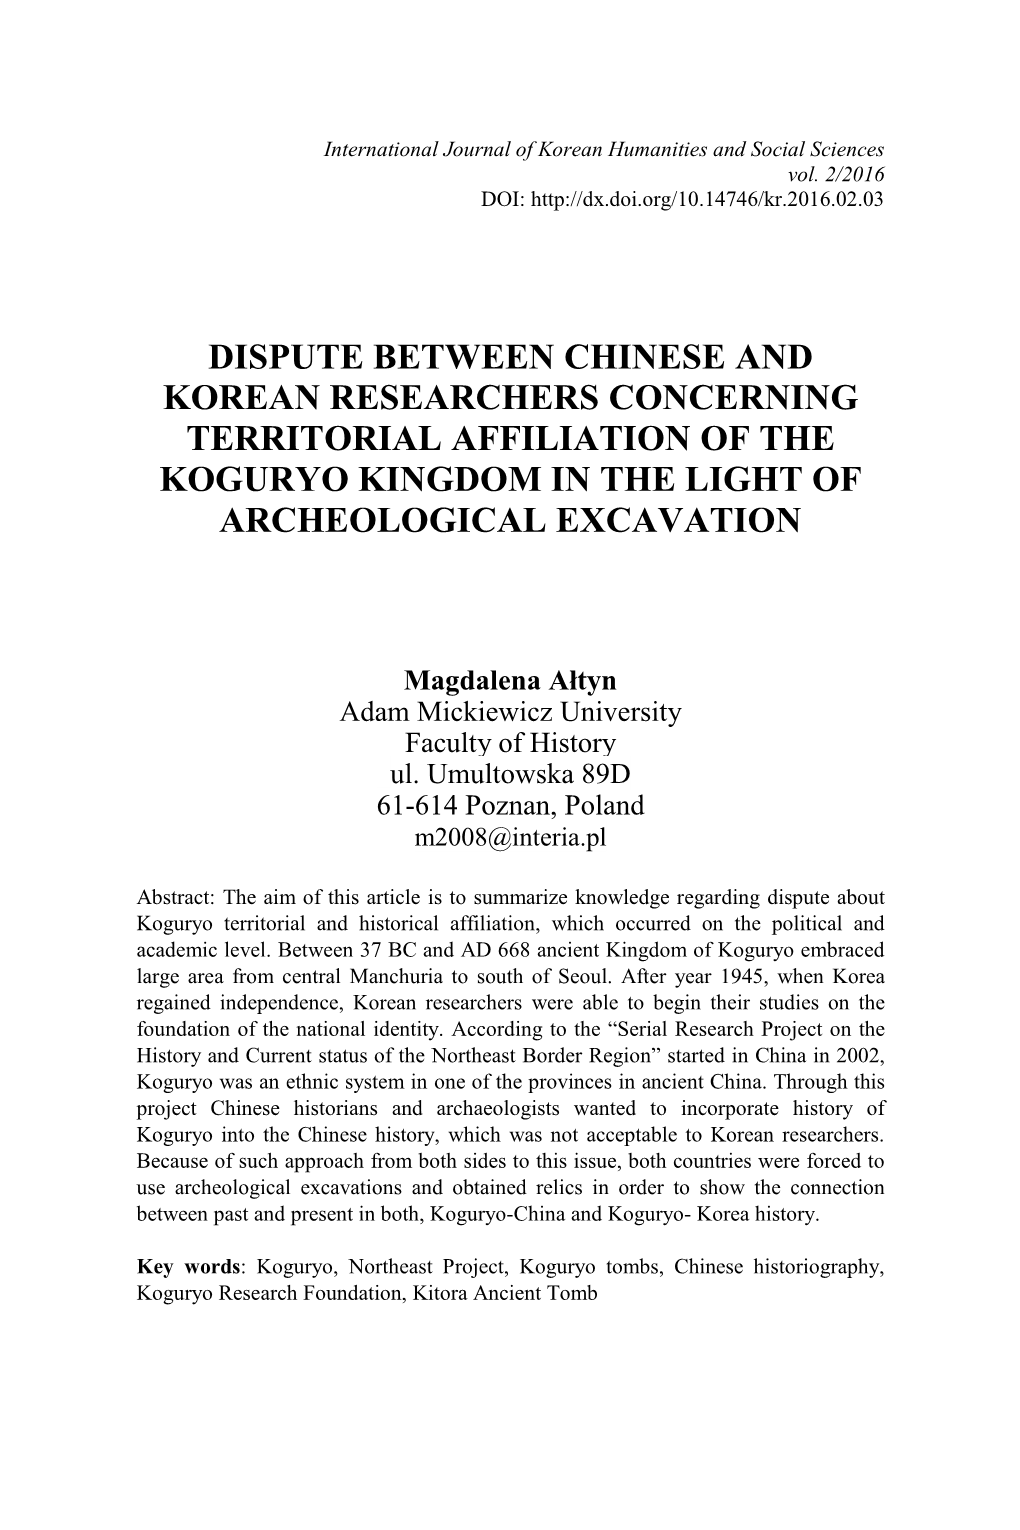 Dispute Between Chinese and Korean Researchers Concerning Territorial Affiliation of the Koguryo Kingdom in the Light of Archeological Excavation